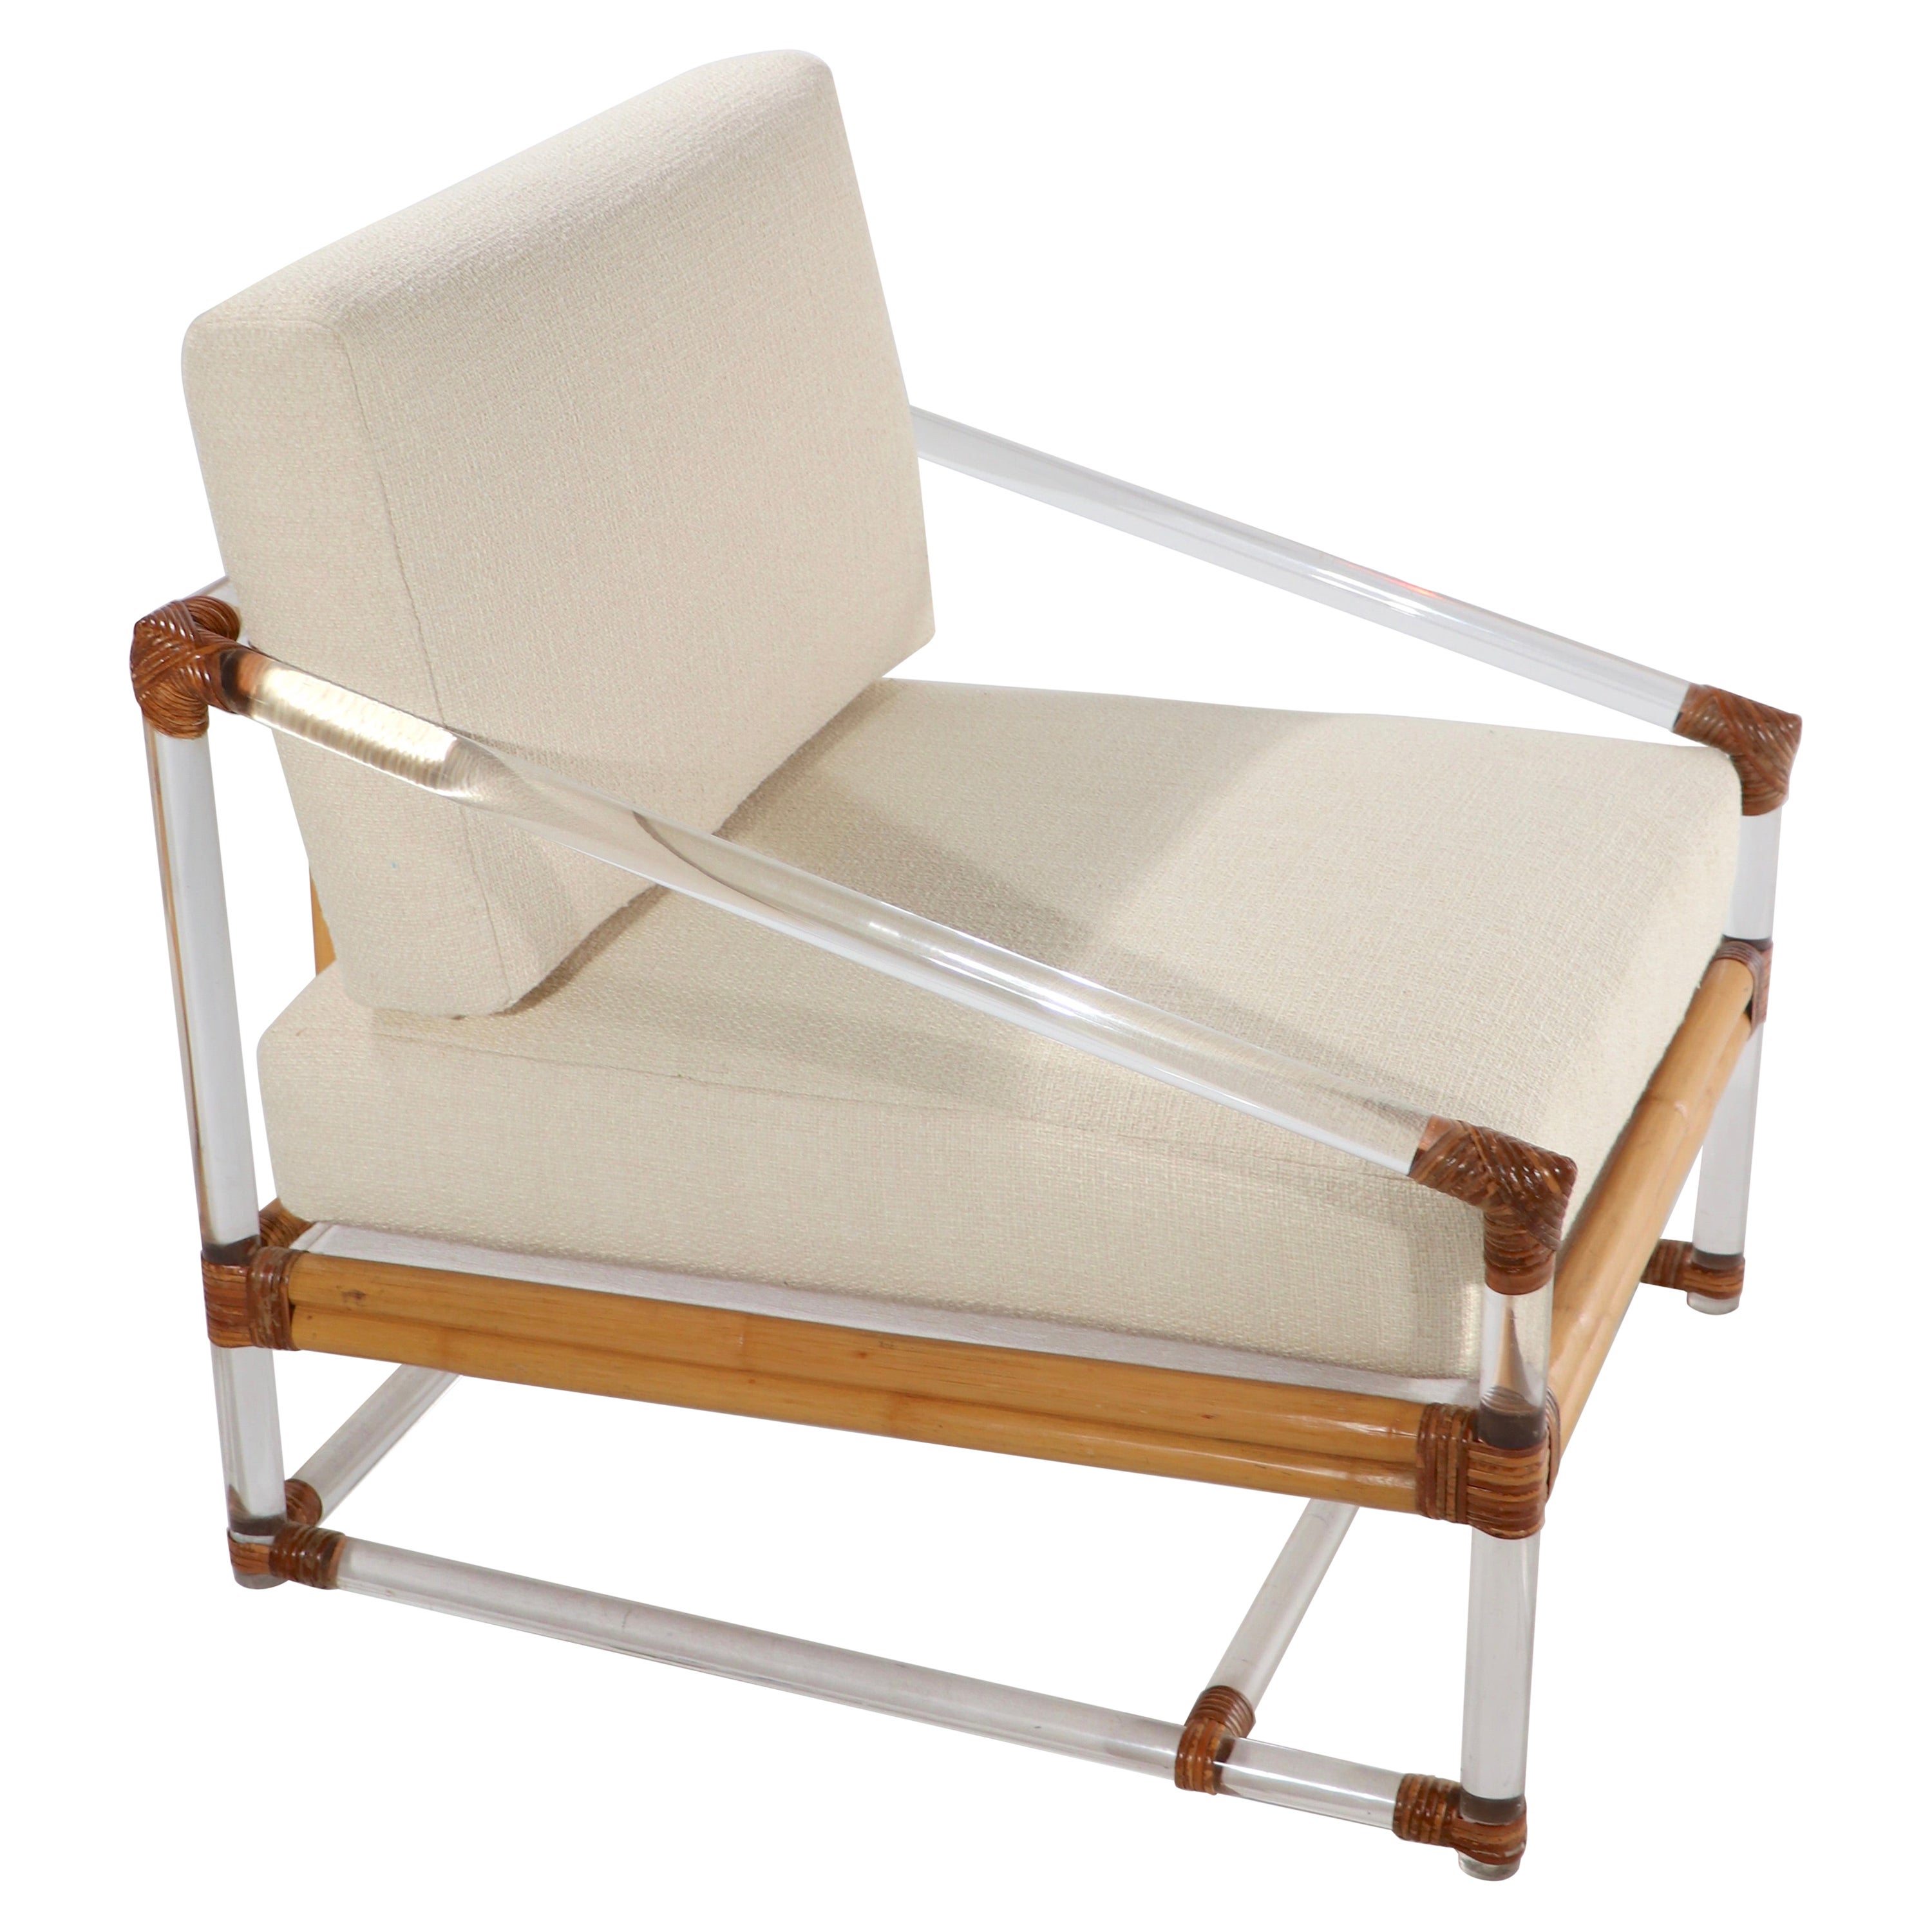 Lucite and Wicker Lounge Chair by McGuire